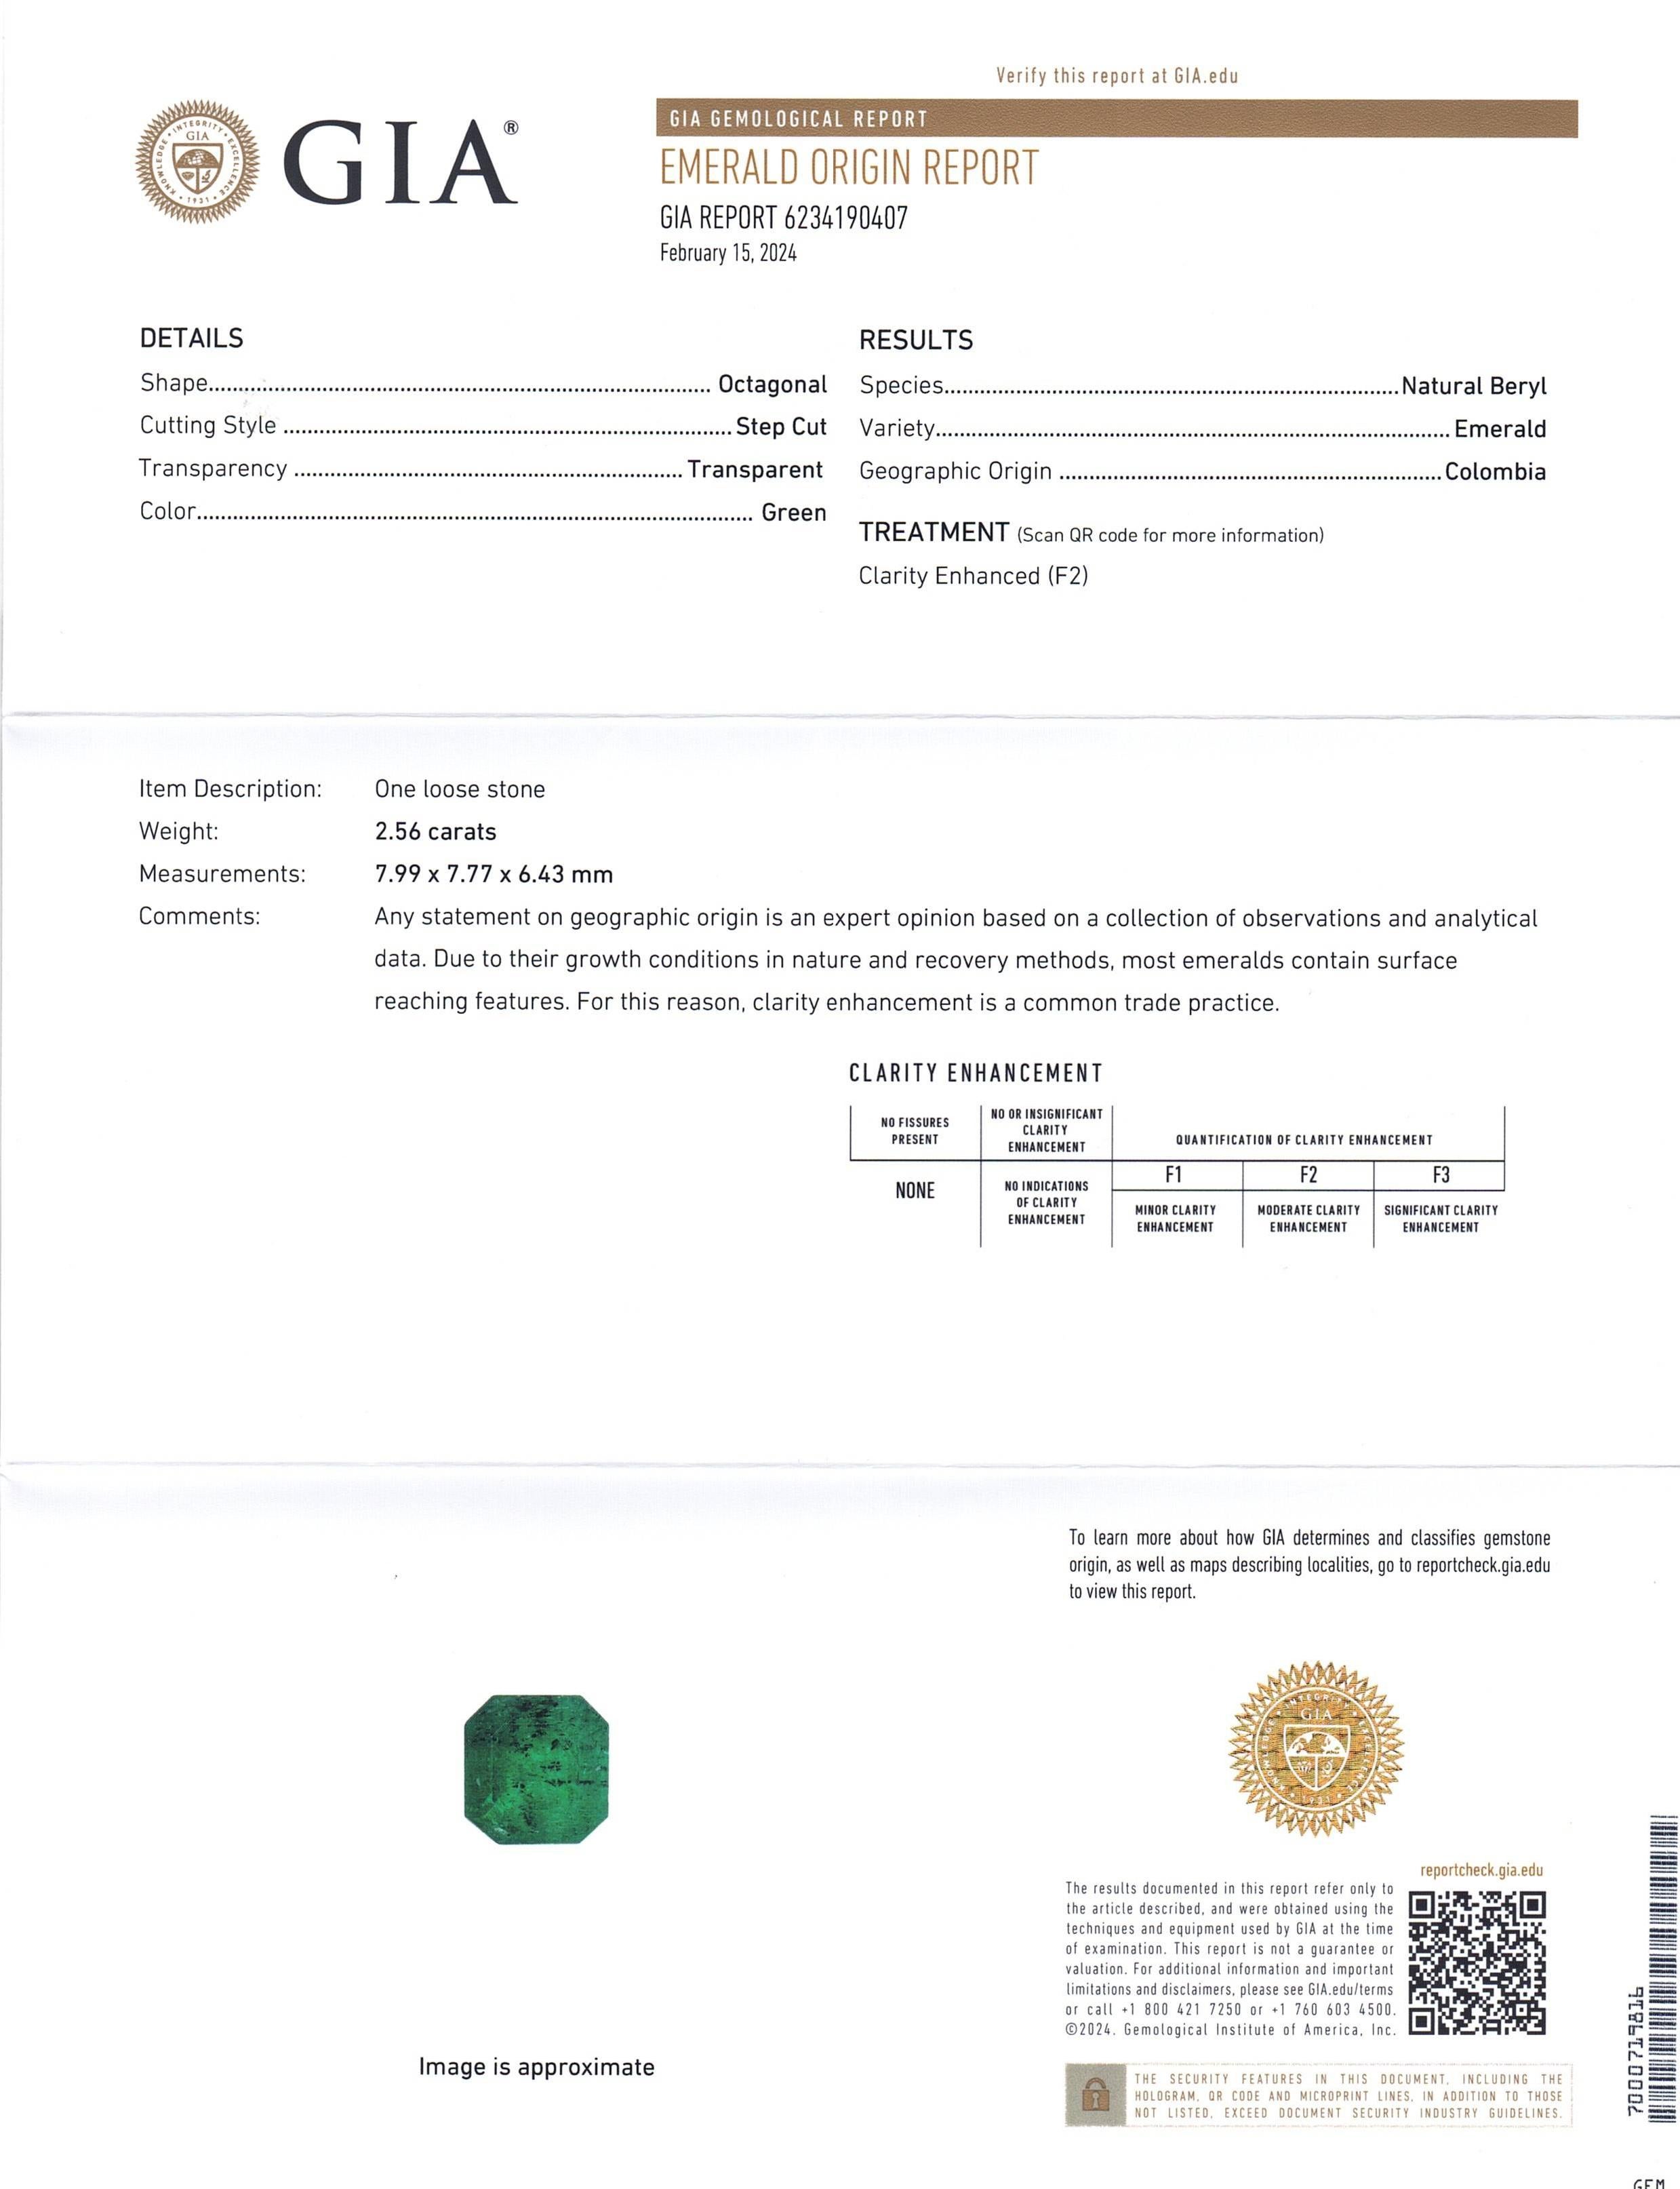 This is a stunning GIA Certified Emerald 


The GIA report reads as follows:

GIA Report Number: 6234190407
Shape: Octagonal
Cutting Style: Step Cut
Cutting Style: Crown: 
Cutting Style: Pavilion: 
Transparency: Transparent
Colour: